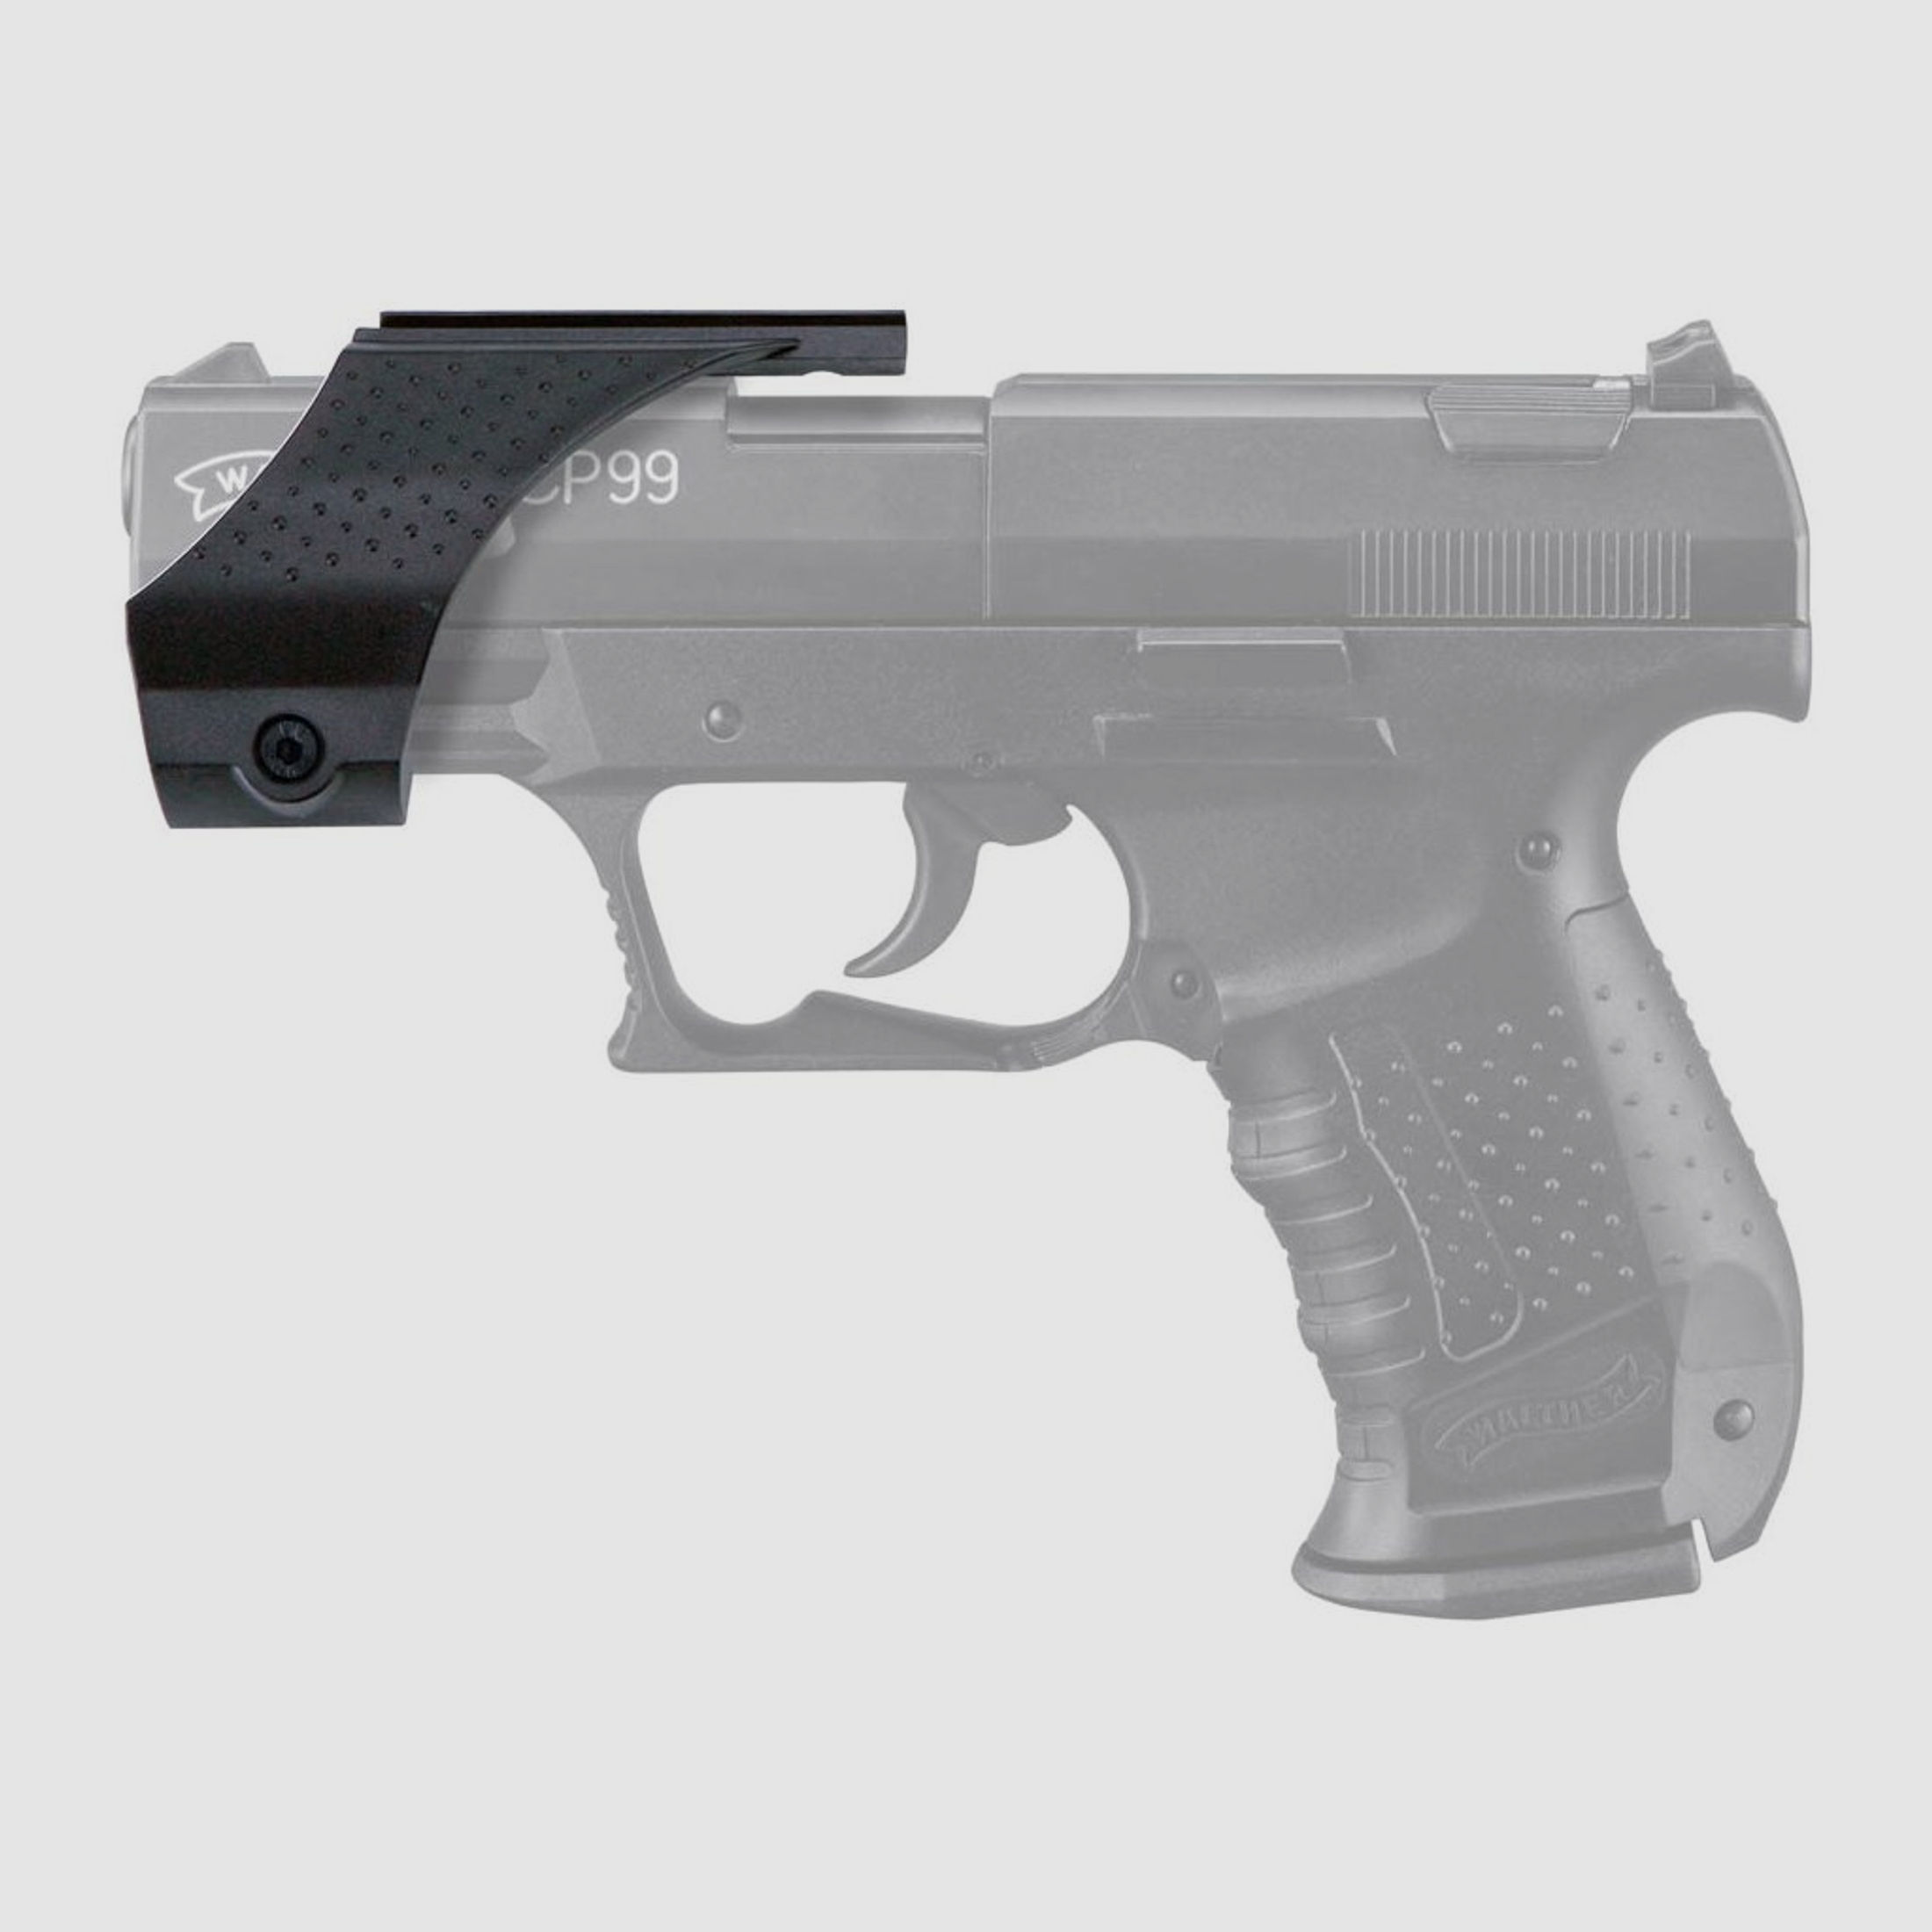 Walther CP99 BLK